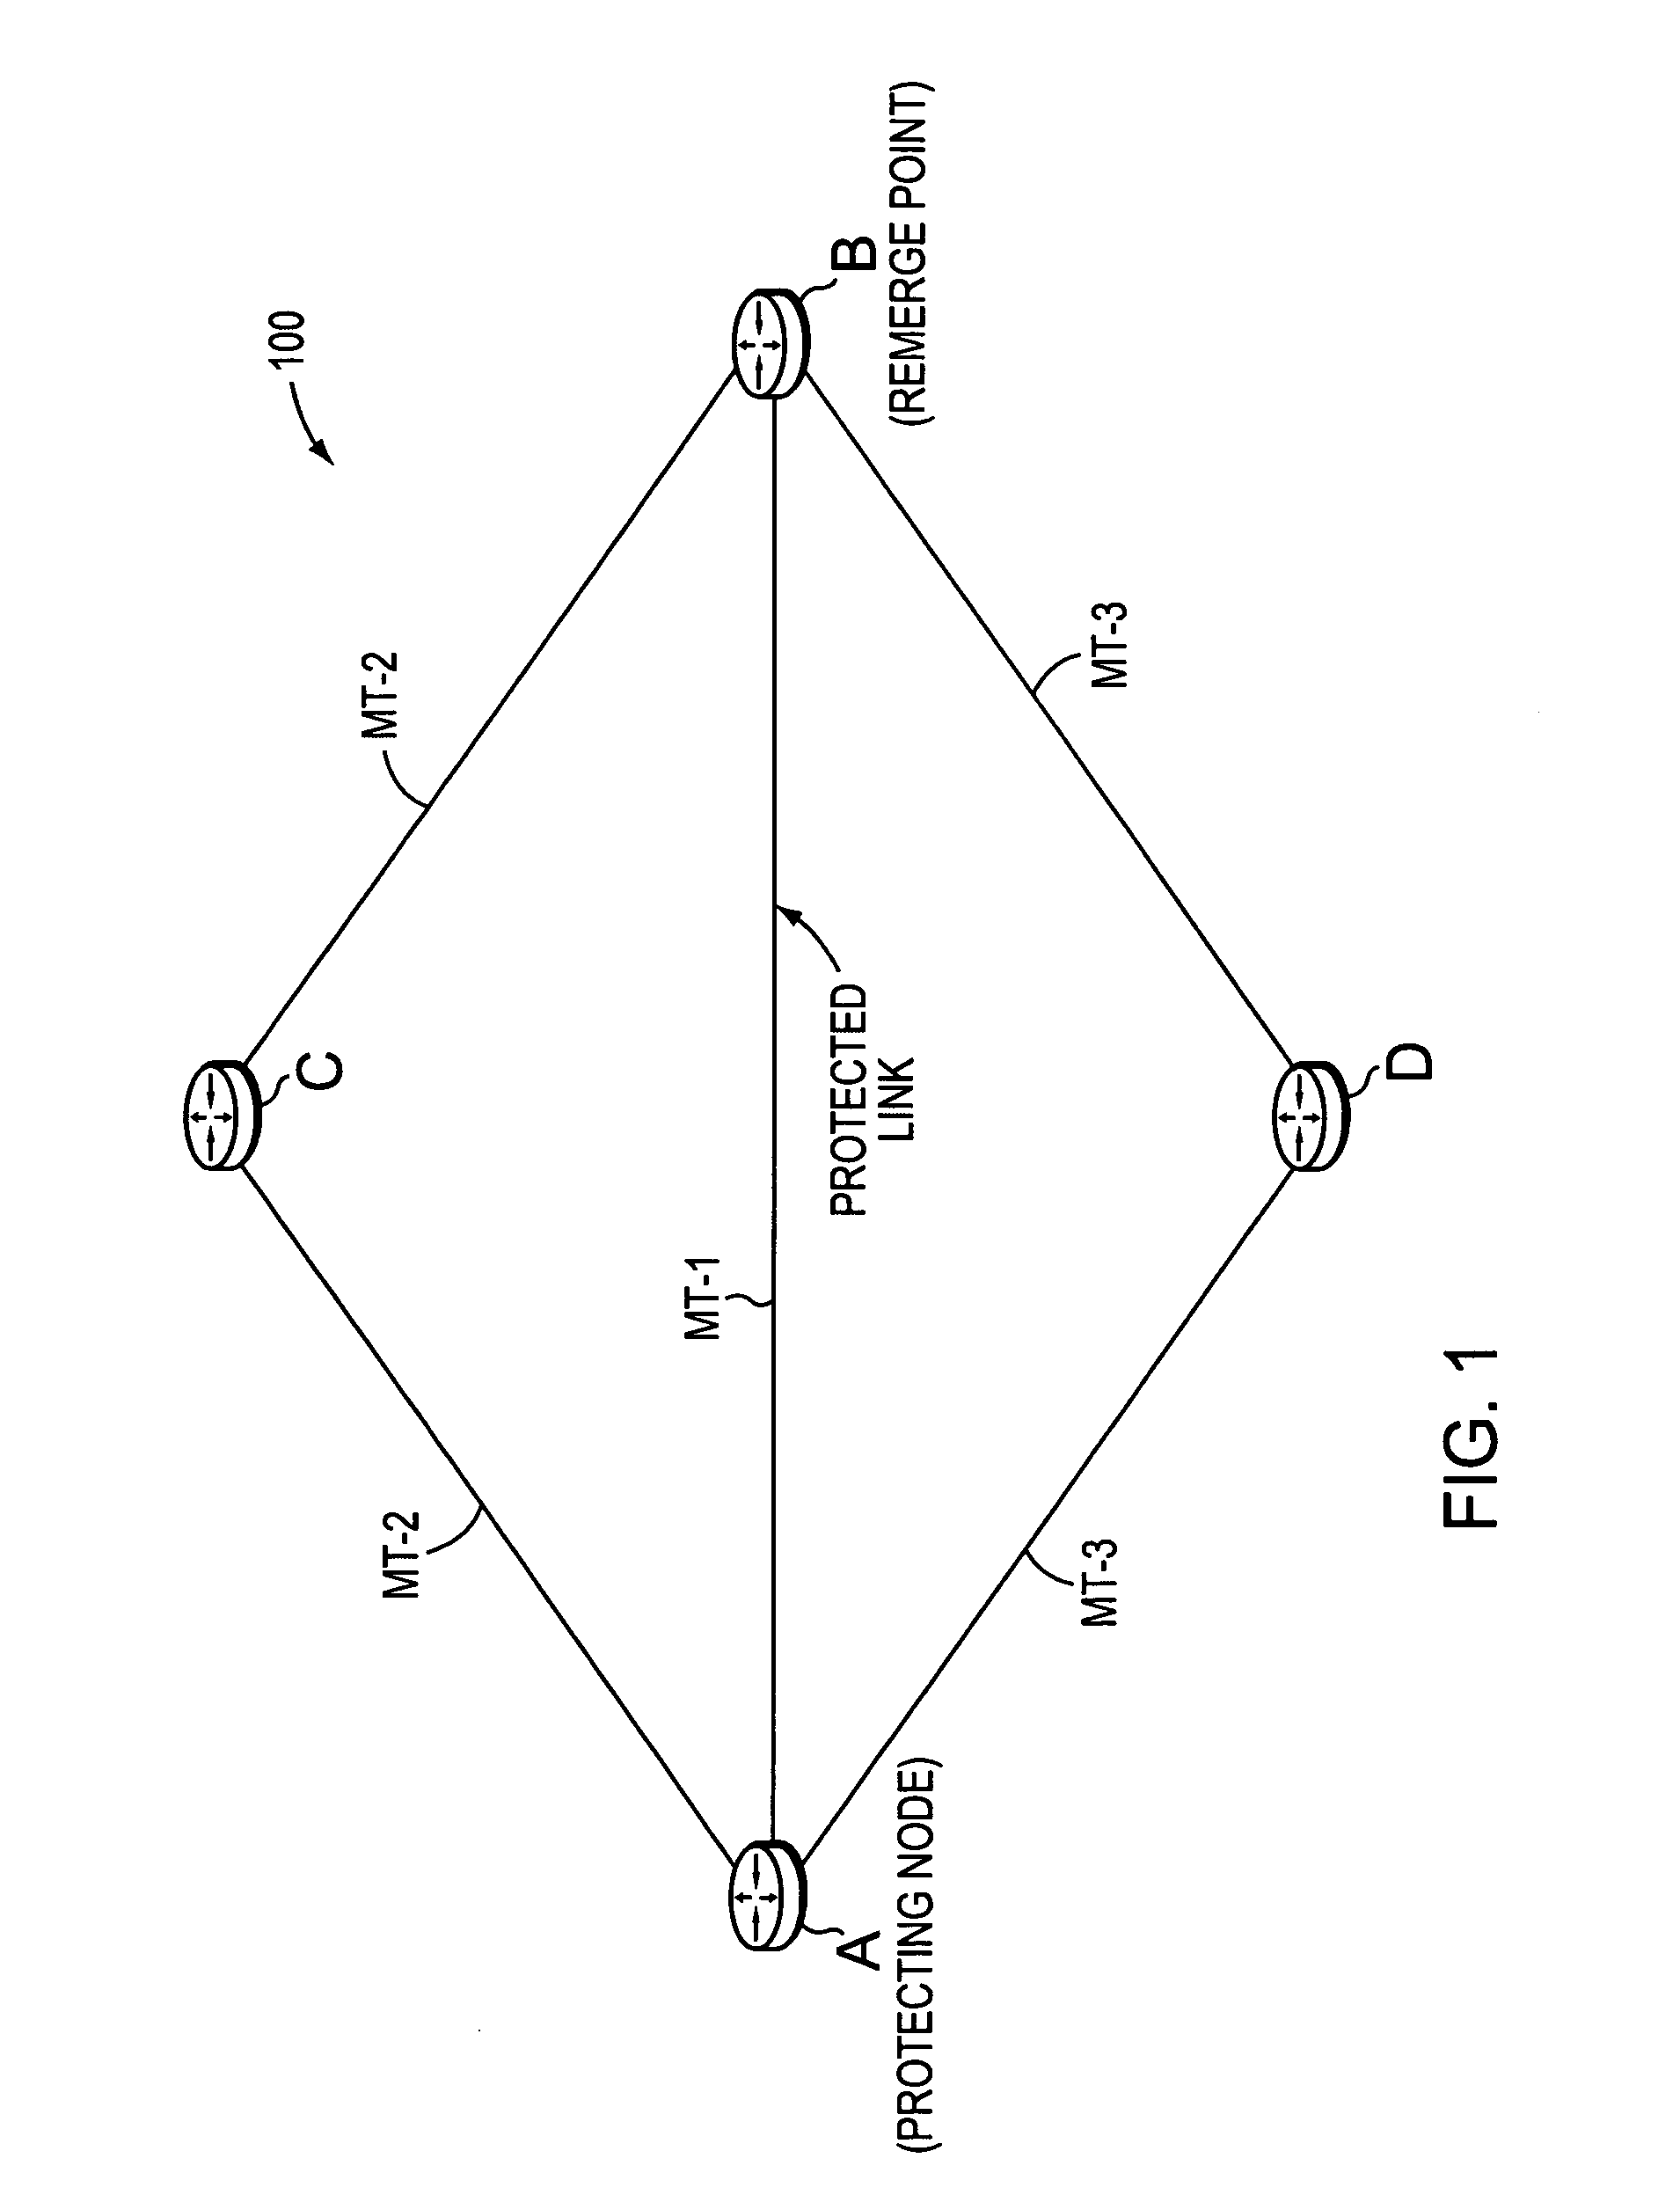 Technique for protecting against failure of a network element using Multi-Topology Repair Routing (MTRR)